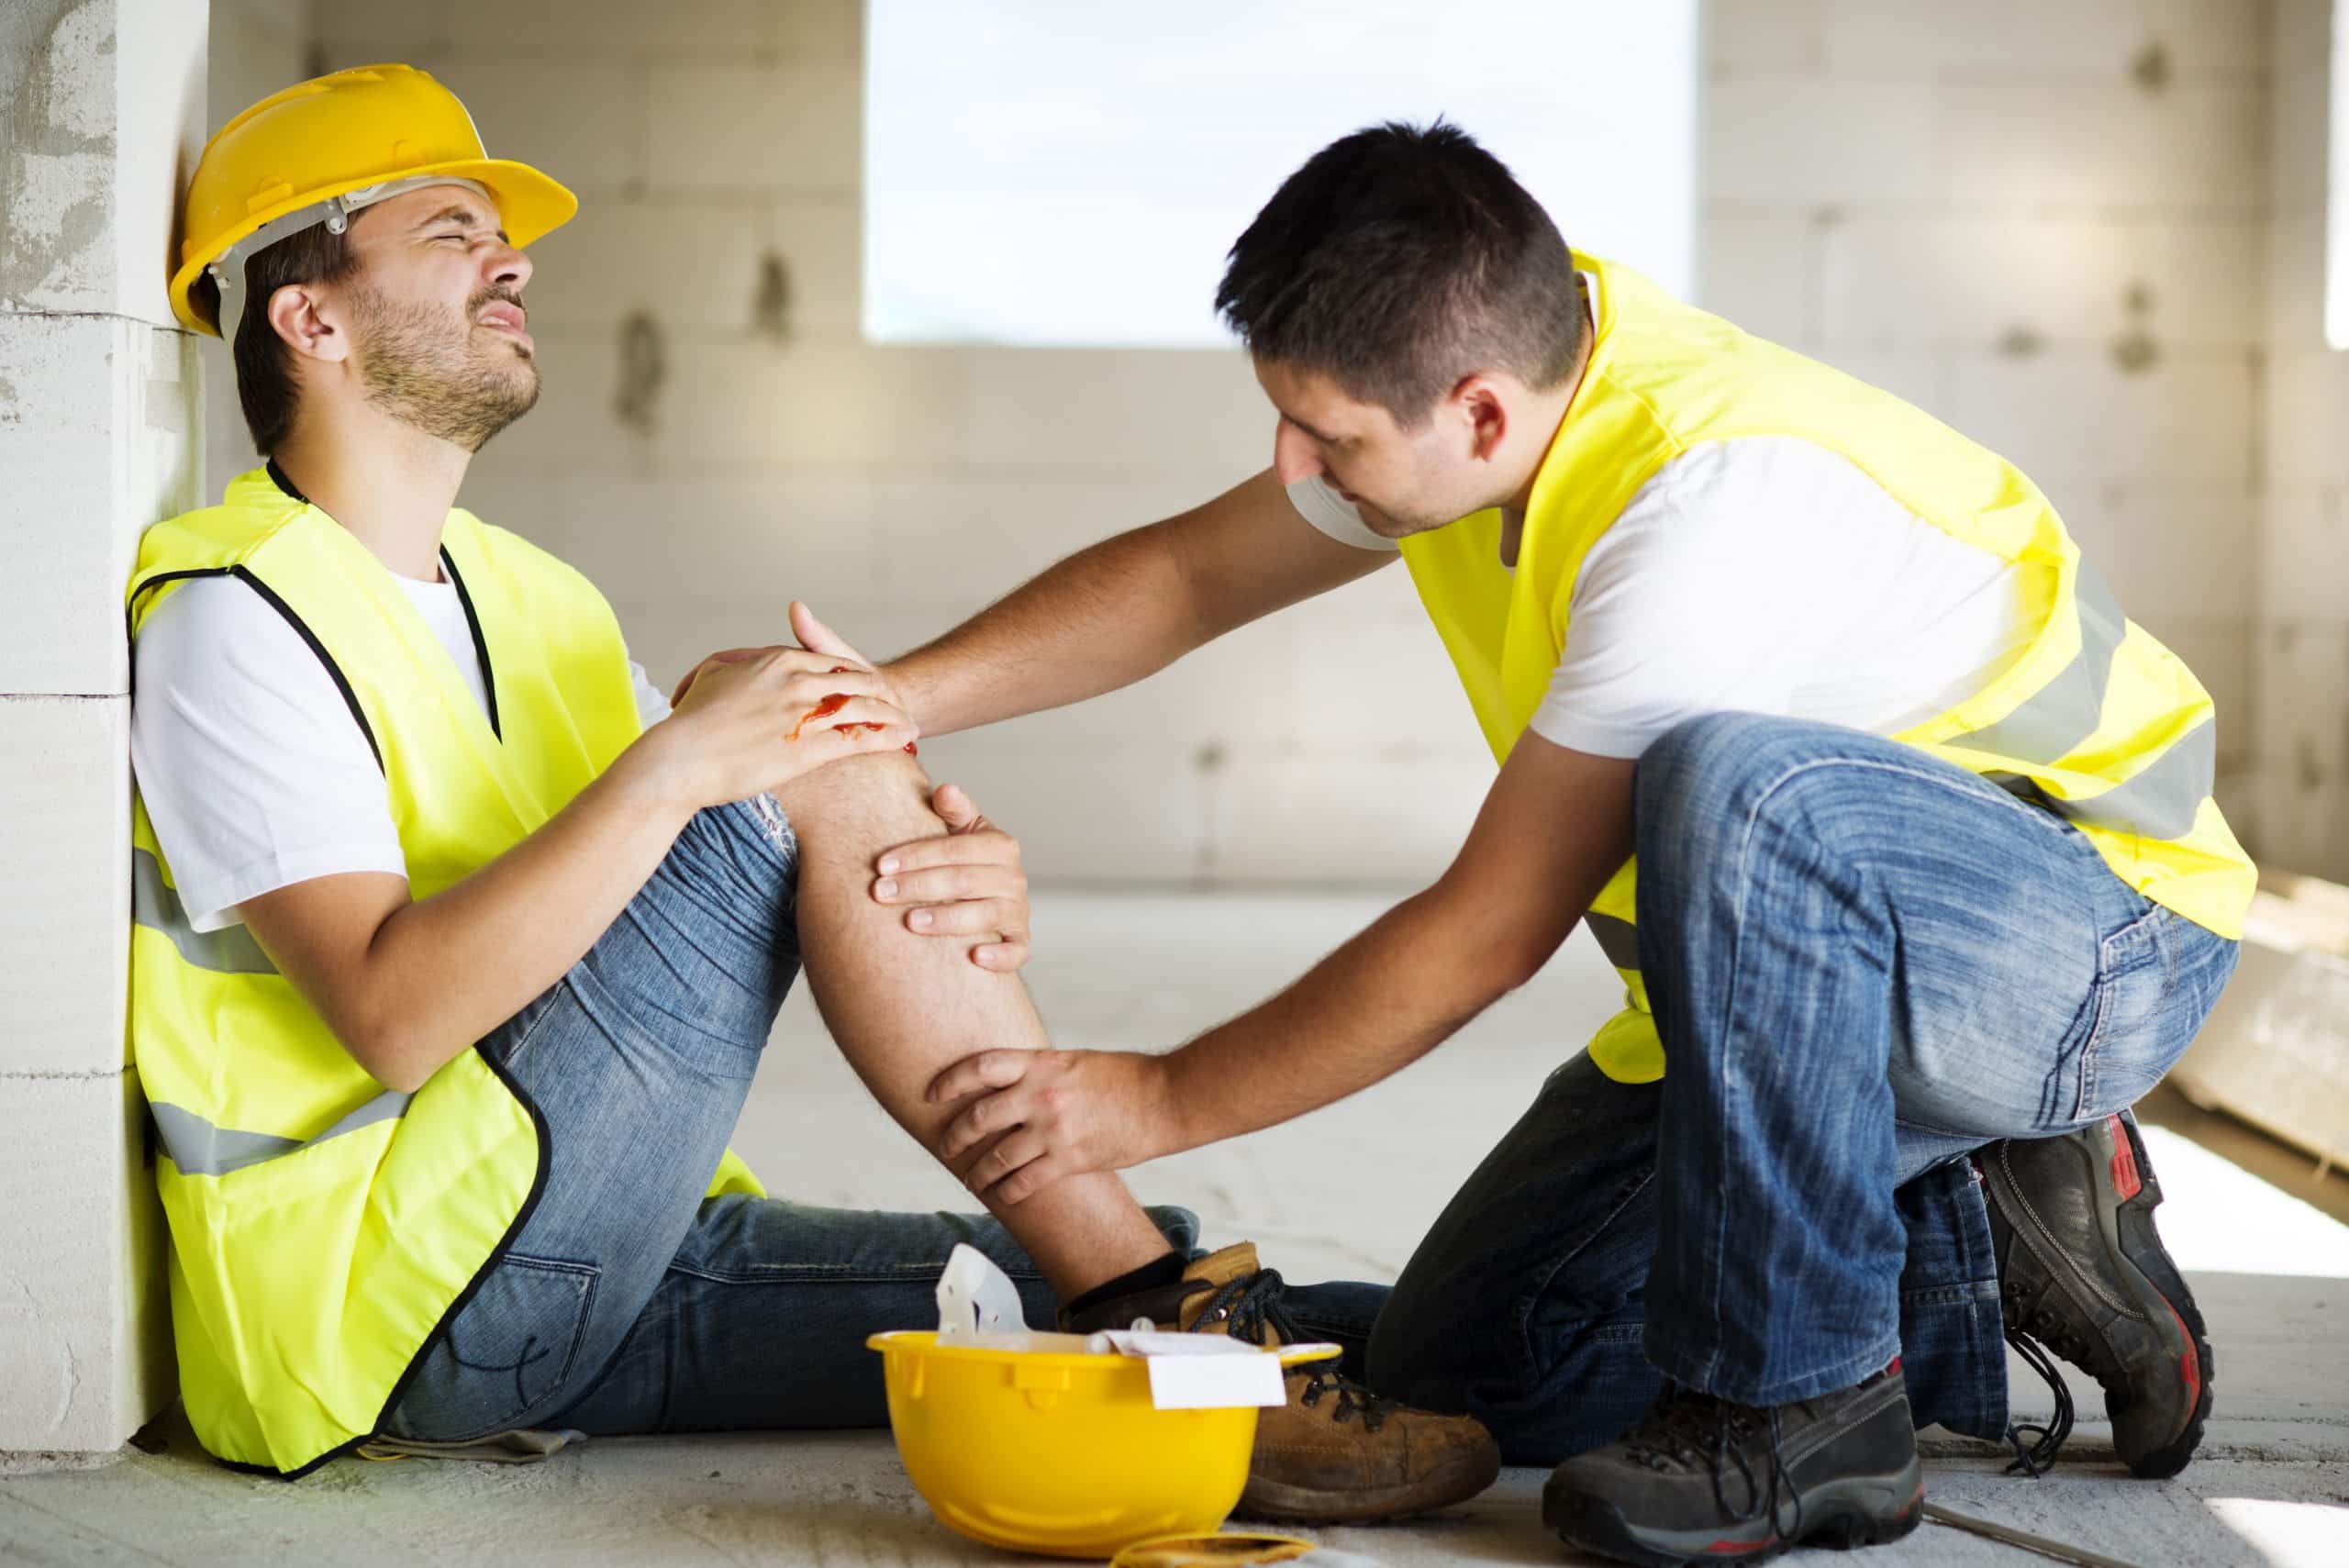 What Is The Difference Between Workers Comp And Employers Liability?